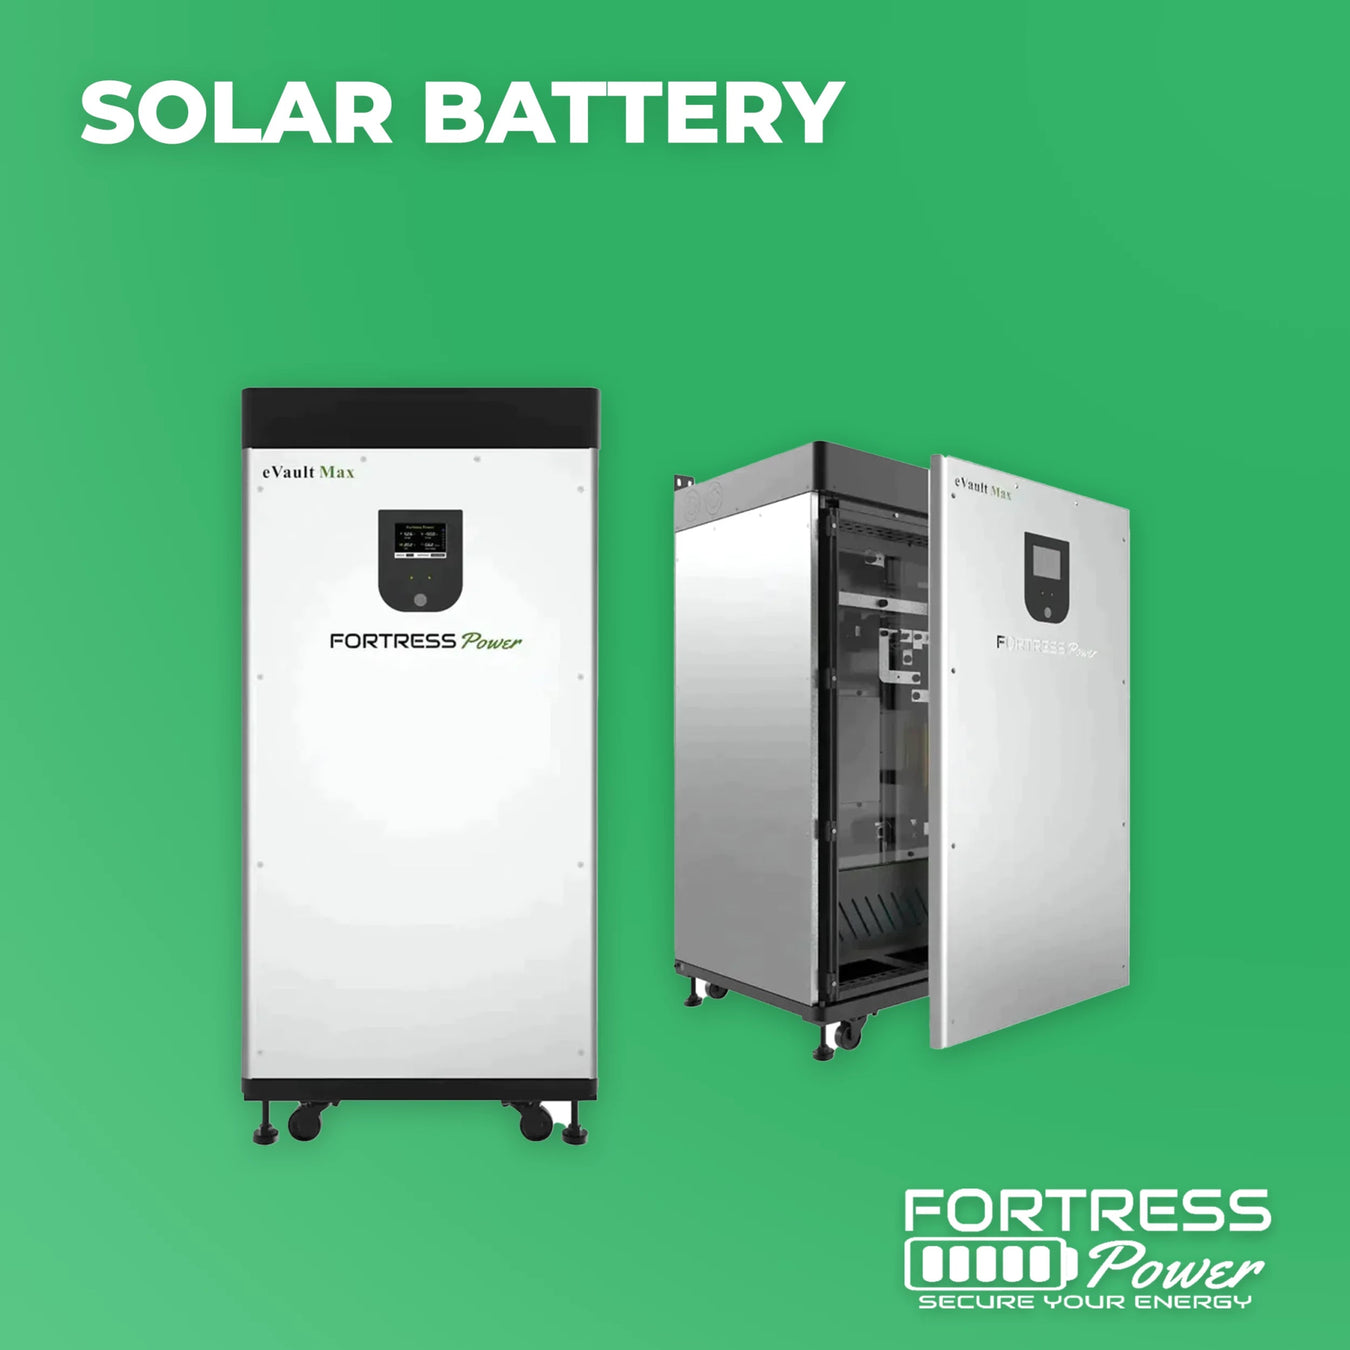 Fortress Power - Solar Battery - PremiumDepot Collection